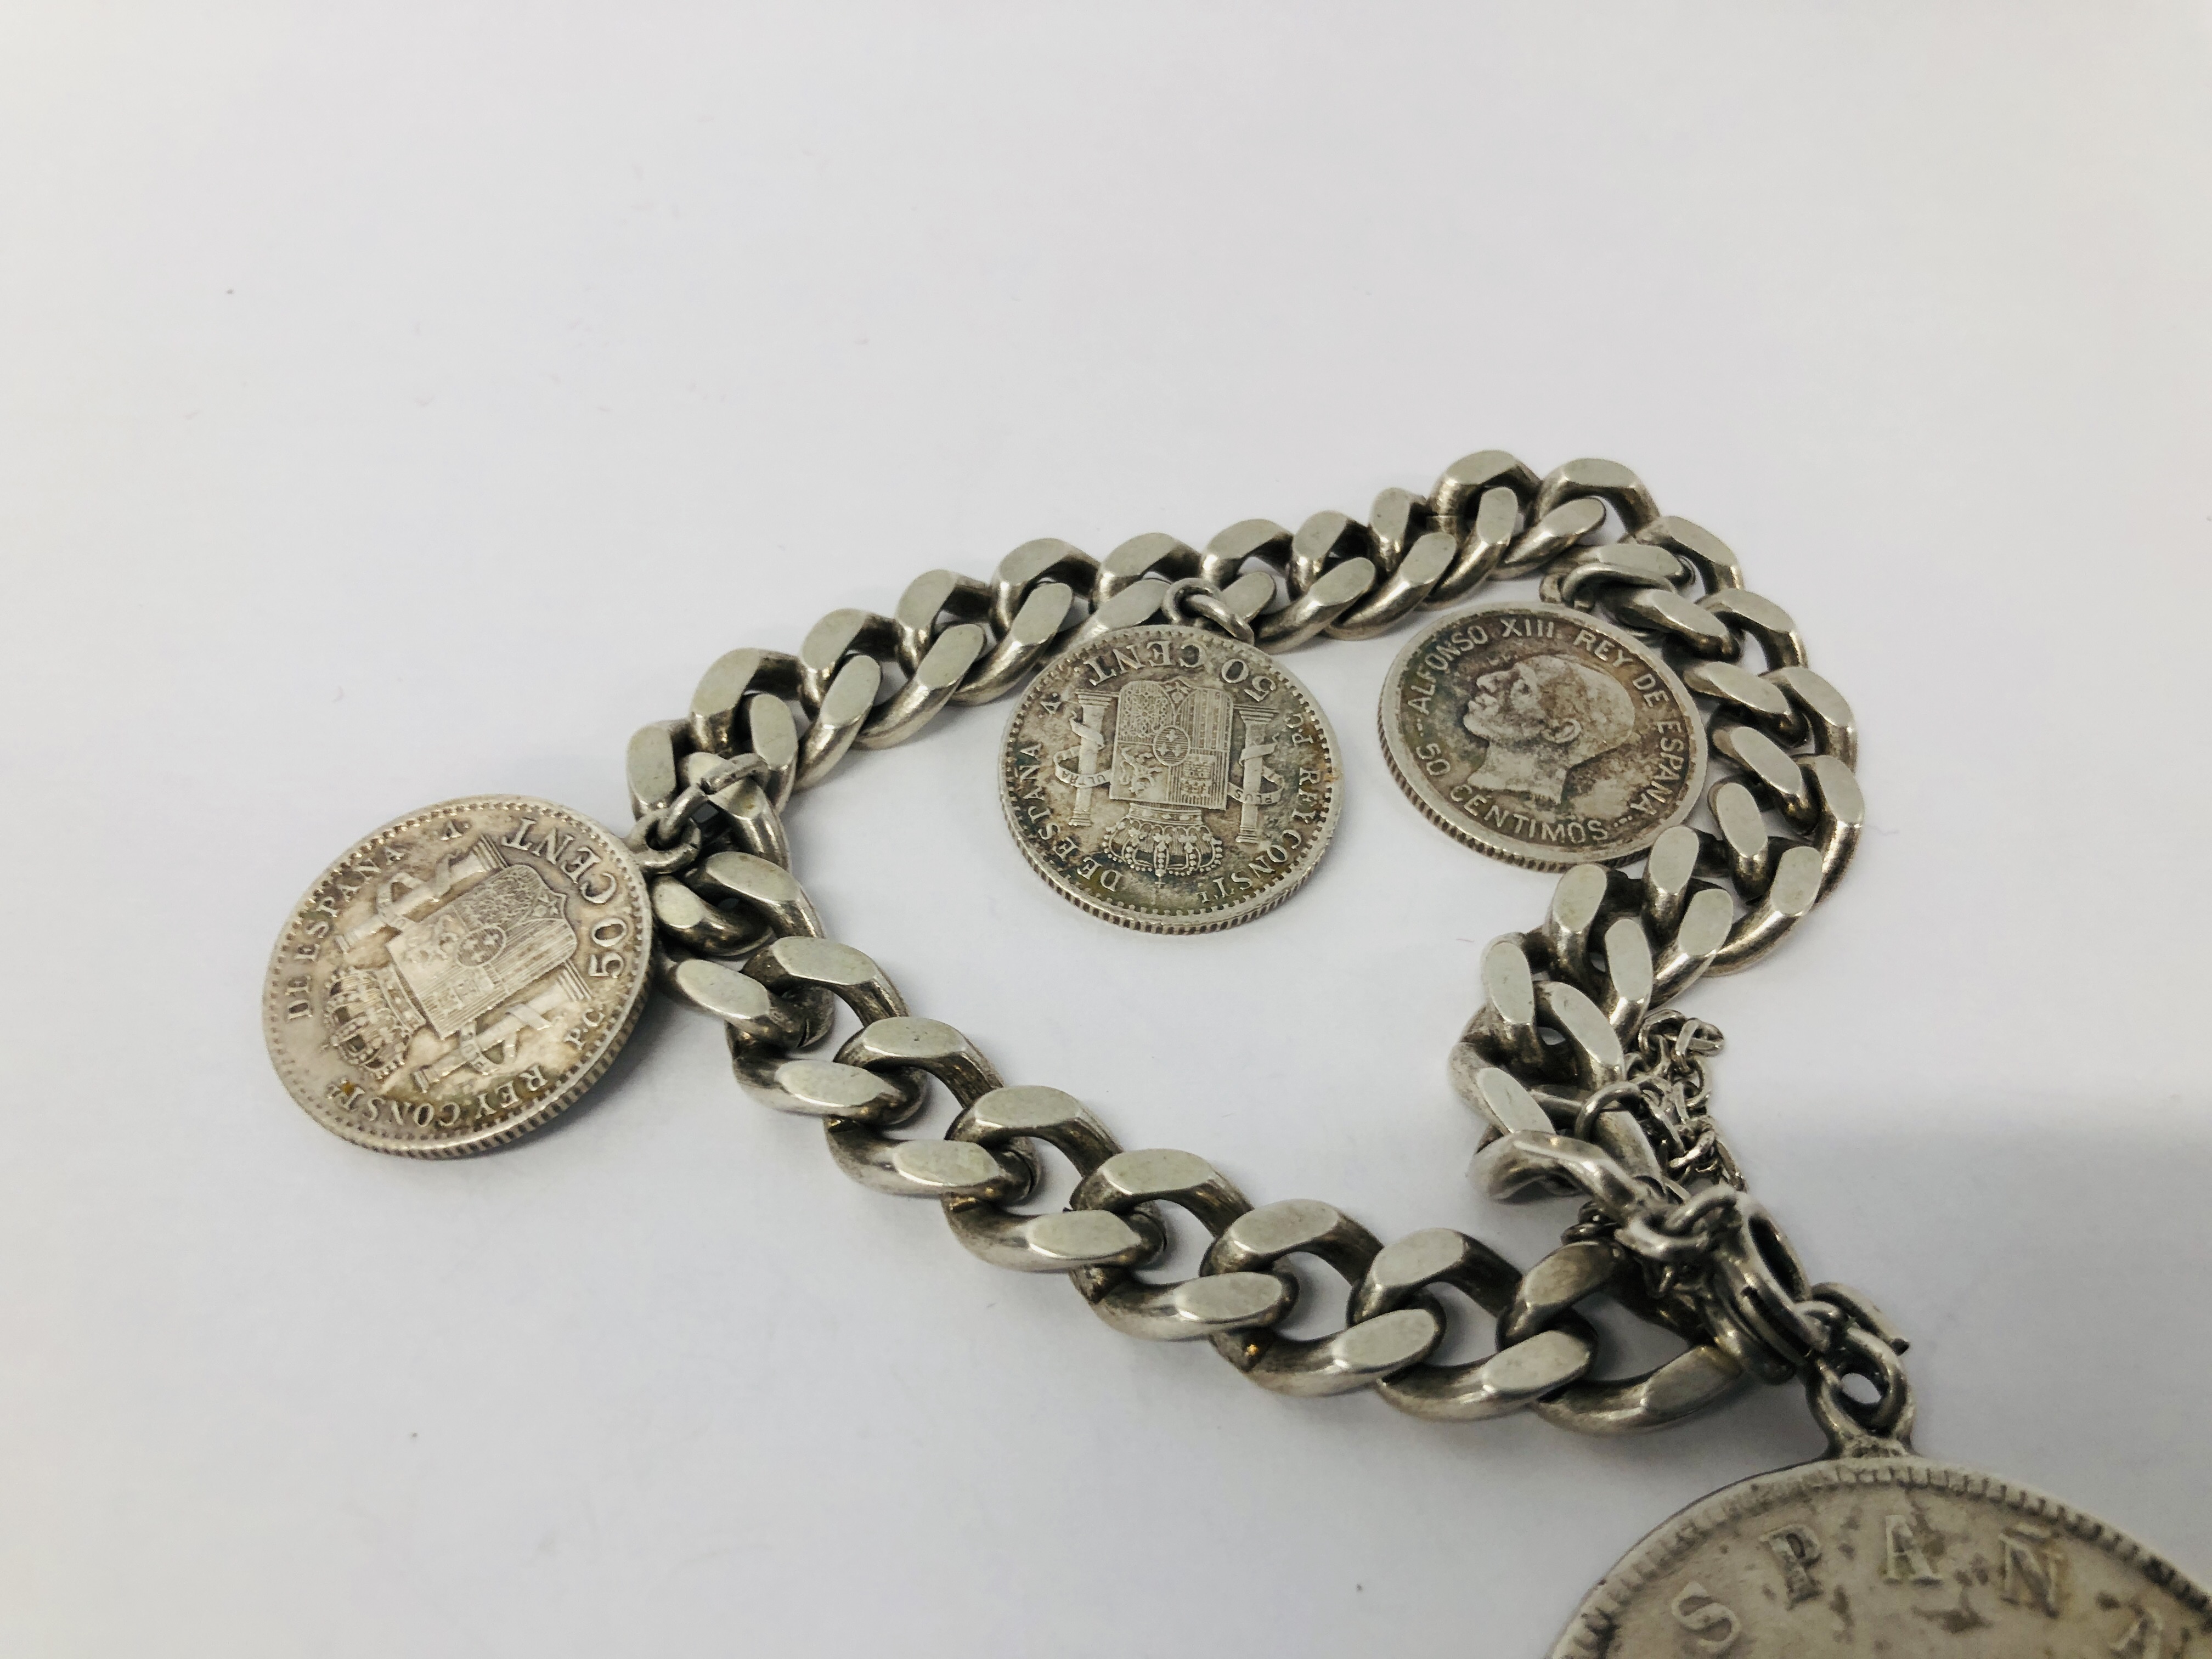 VINTAGE WHITE METAL FLAT LINK CURB BRACELET WITH SAFETY CHAIN HAVING A SPANISH 5 PESETA 1870 COIN - Image 4 of 7